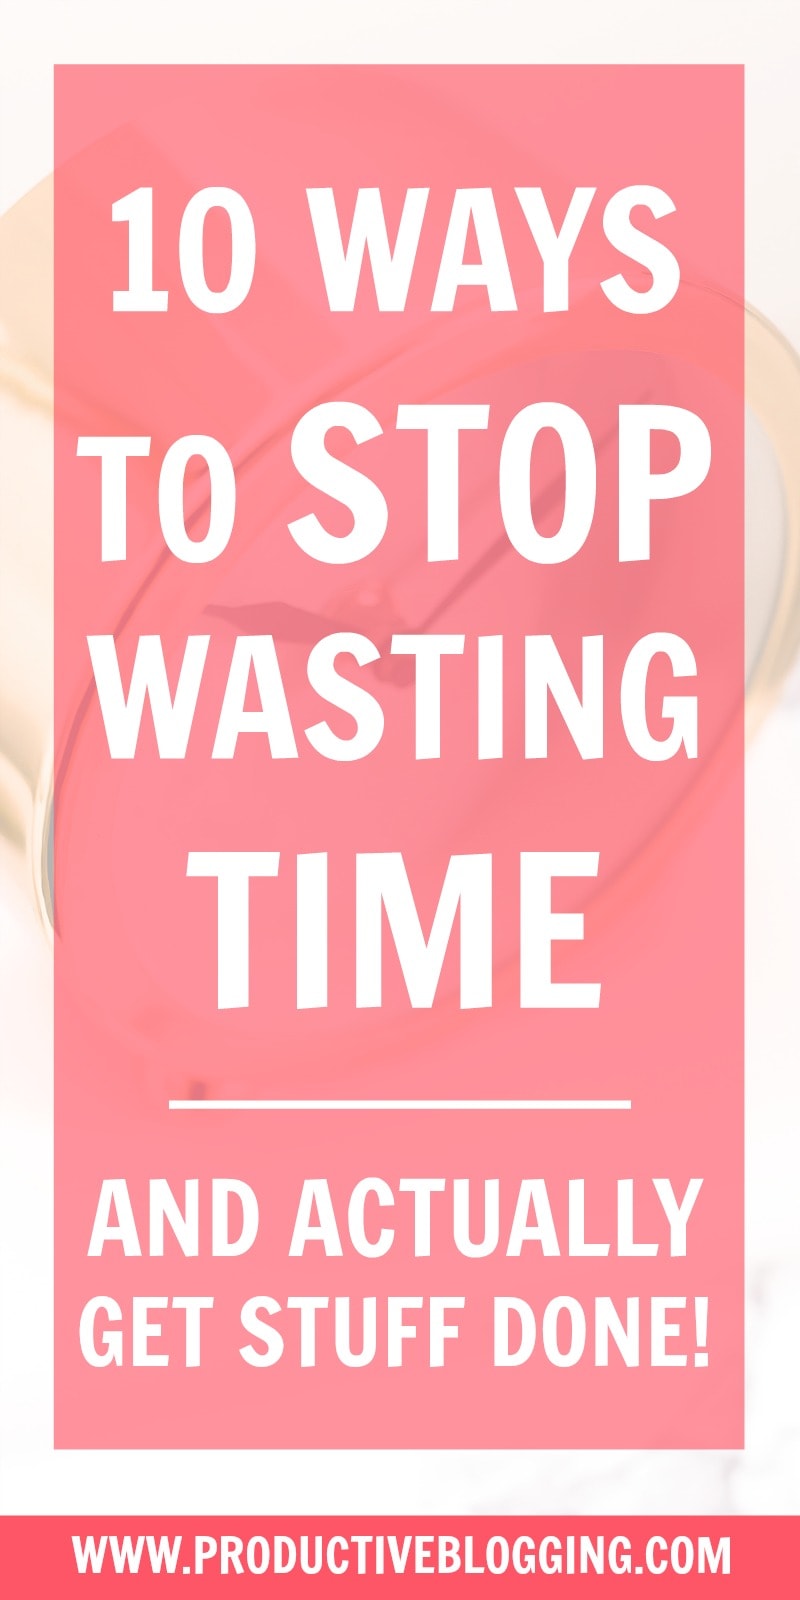 Are you forever procrastinating? Are you far too easily distracted? Then you need these 10 ways to stop wasting time and actually get stuff done on your blog! #procrastination #procrastinating #procrastinator #timesuck #timewasting #productivity #productivitytips #productivityhacks #productivityhabits #productiveblogging #bloggingtips #blogginghacks #blogsmarter #blogsmarternotharder #BSNH #blogging #bloggers #bloggerlife #solopreneur #mompreneur #businessowner #timemanagement #seizetheday